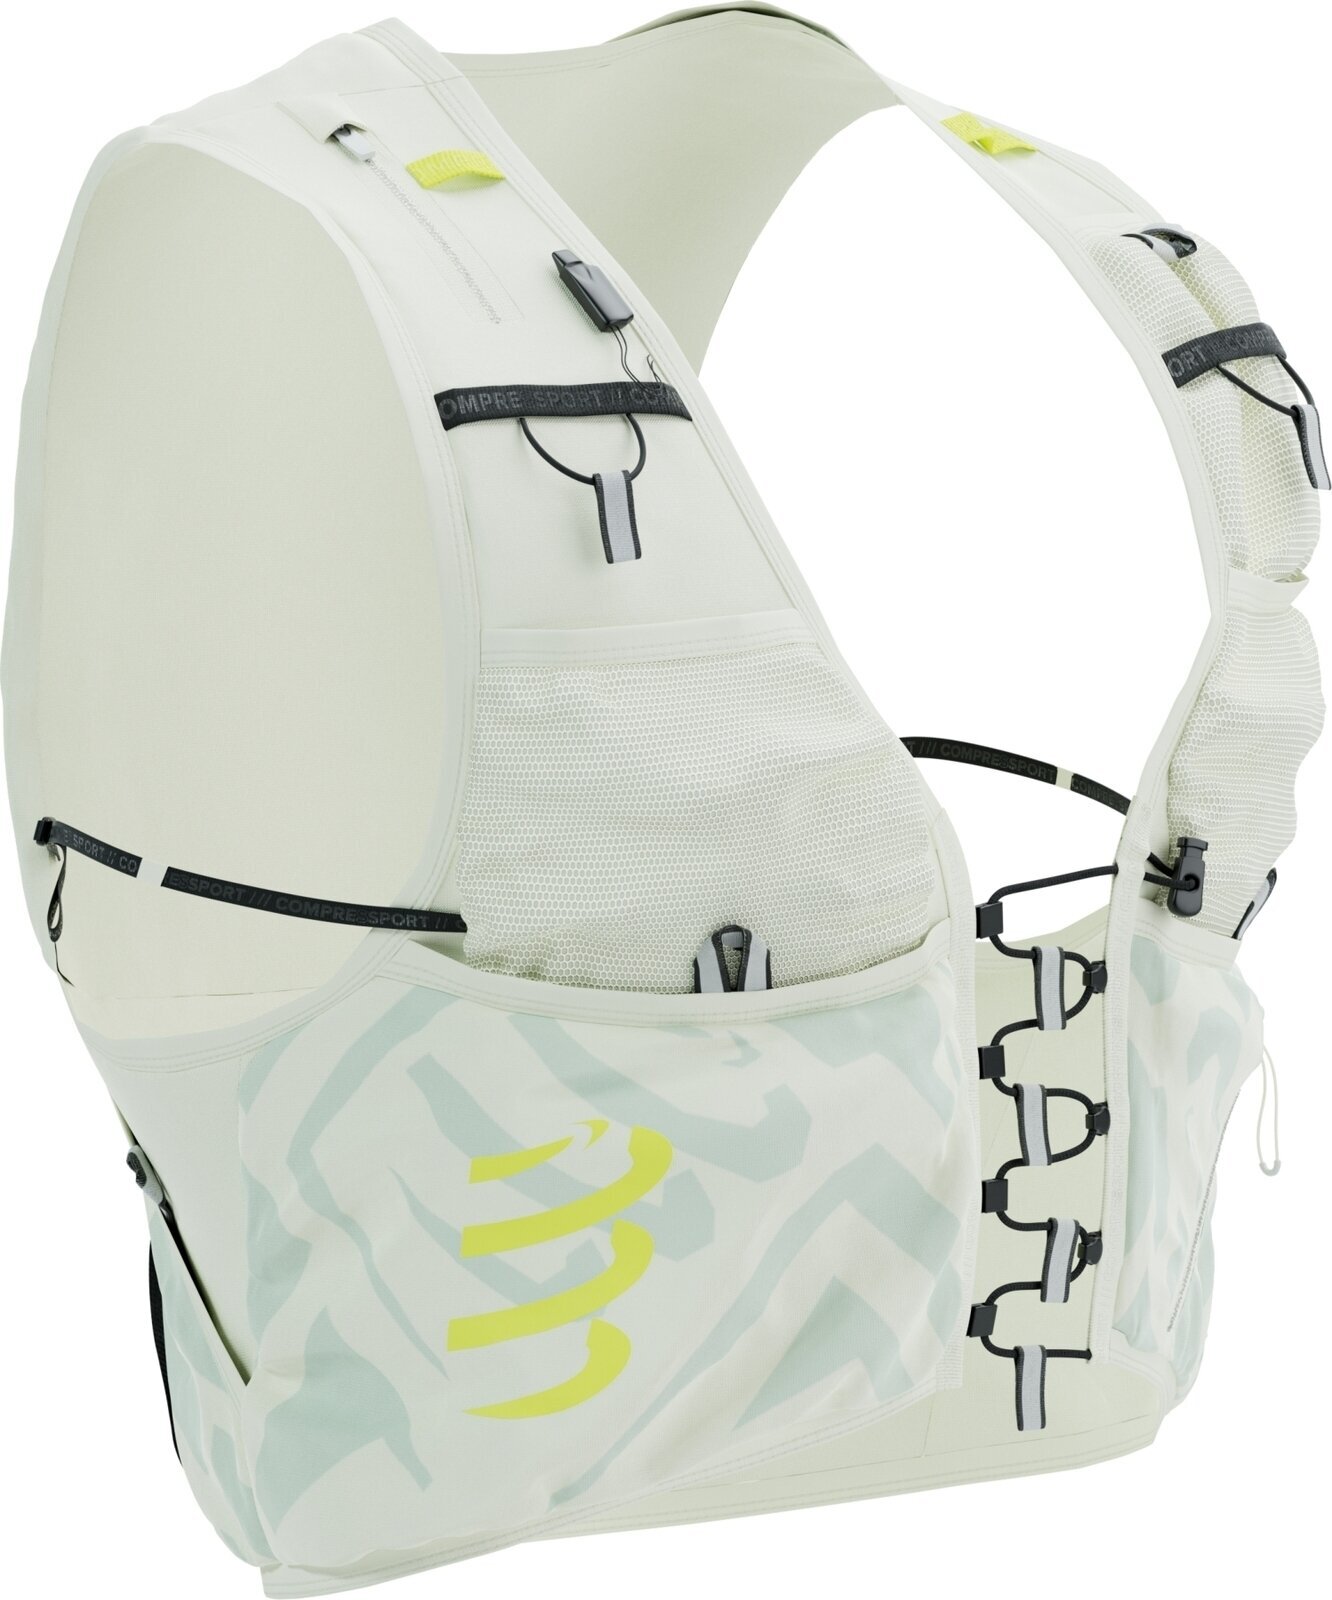 Running backpack Compressport UltRun S Pack Evo 10 Sugar Swizzle/Ice Flow/Safety Yellow M Running backpack